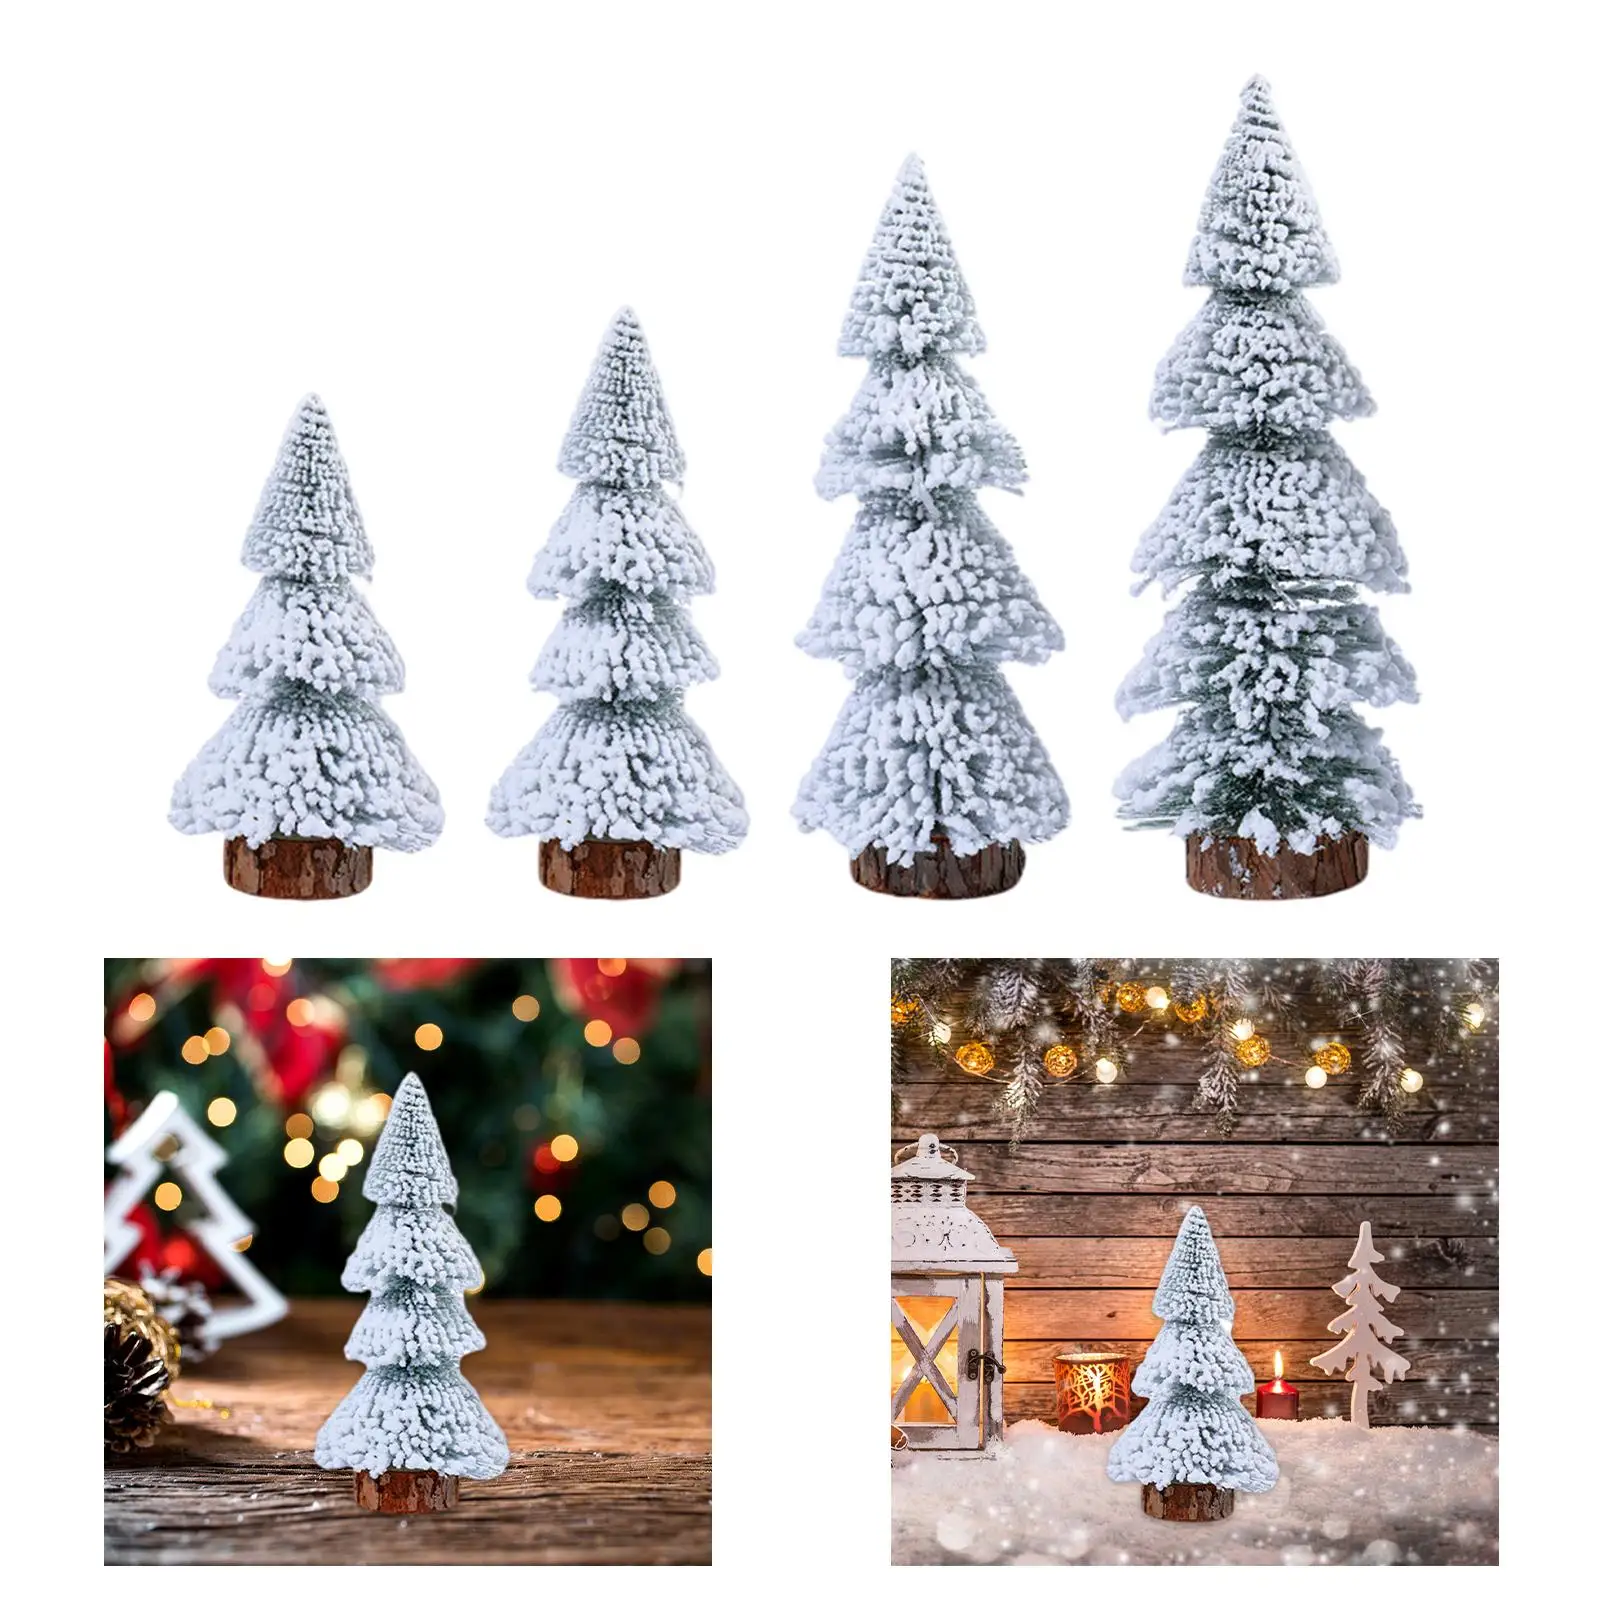 Mini Xmas Tree Table Centerpiece Decorative Party Rustic Small Snow Flocked Christmas Tree for Shelf Fireplace Home Holiday Desk